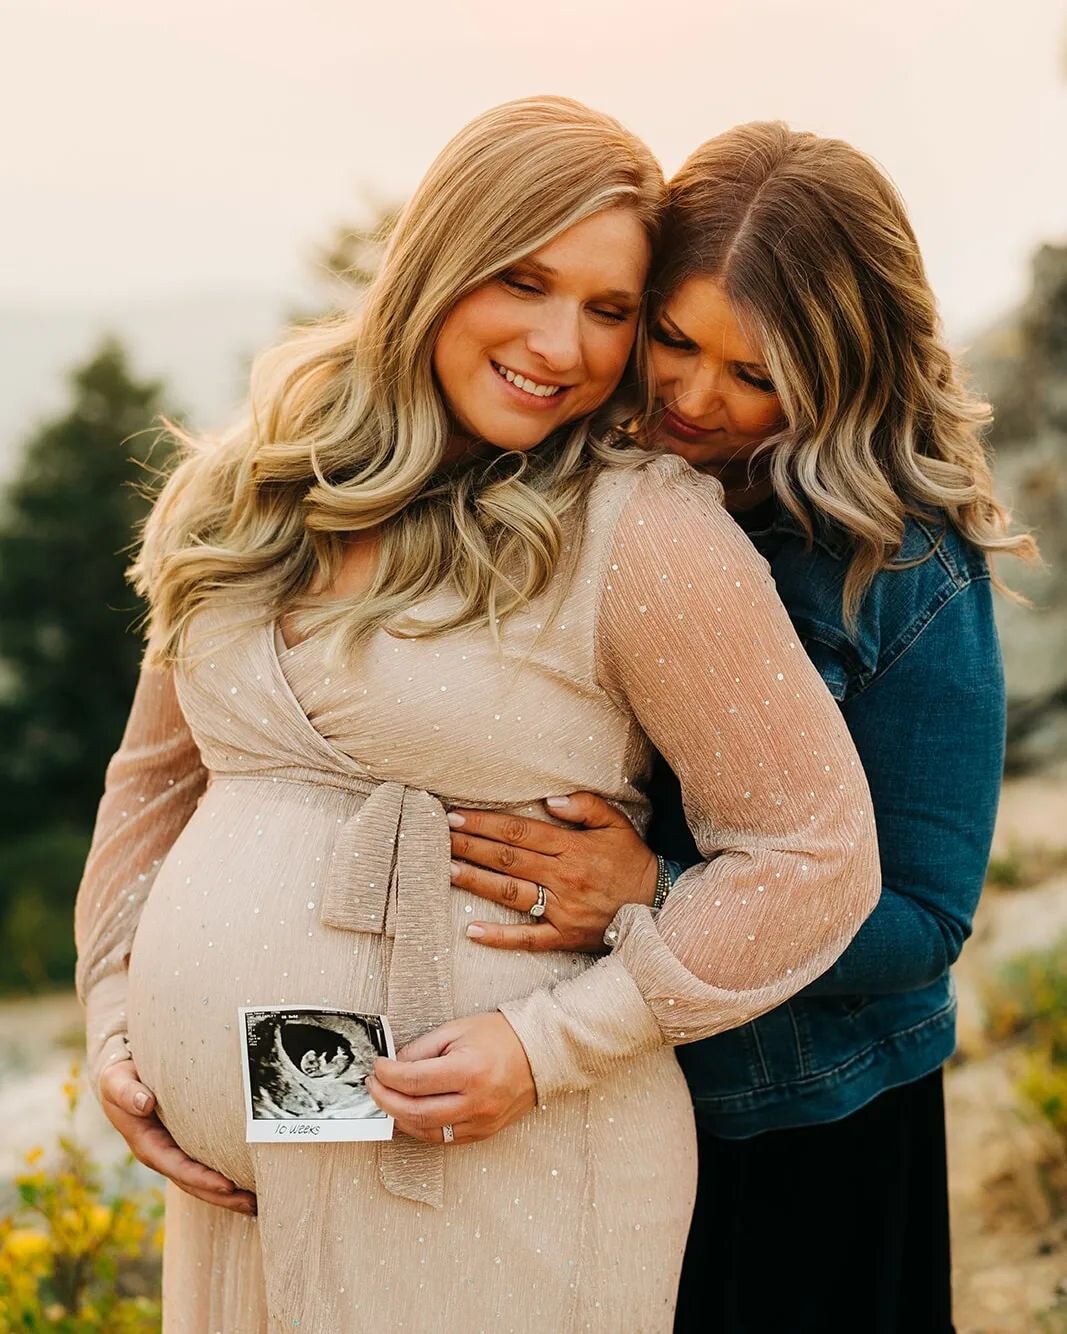 Falissa + Heather's fall maternity session is up on the blog! I met Falissa + Heather for the first time on their elopement day at Cascade Lake in 2019. I was so excited to find out they were pregnant when they reached out in 2021 for a maternity ses